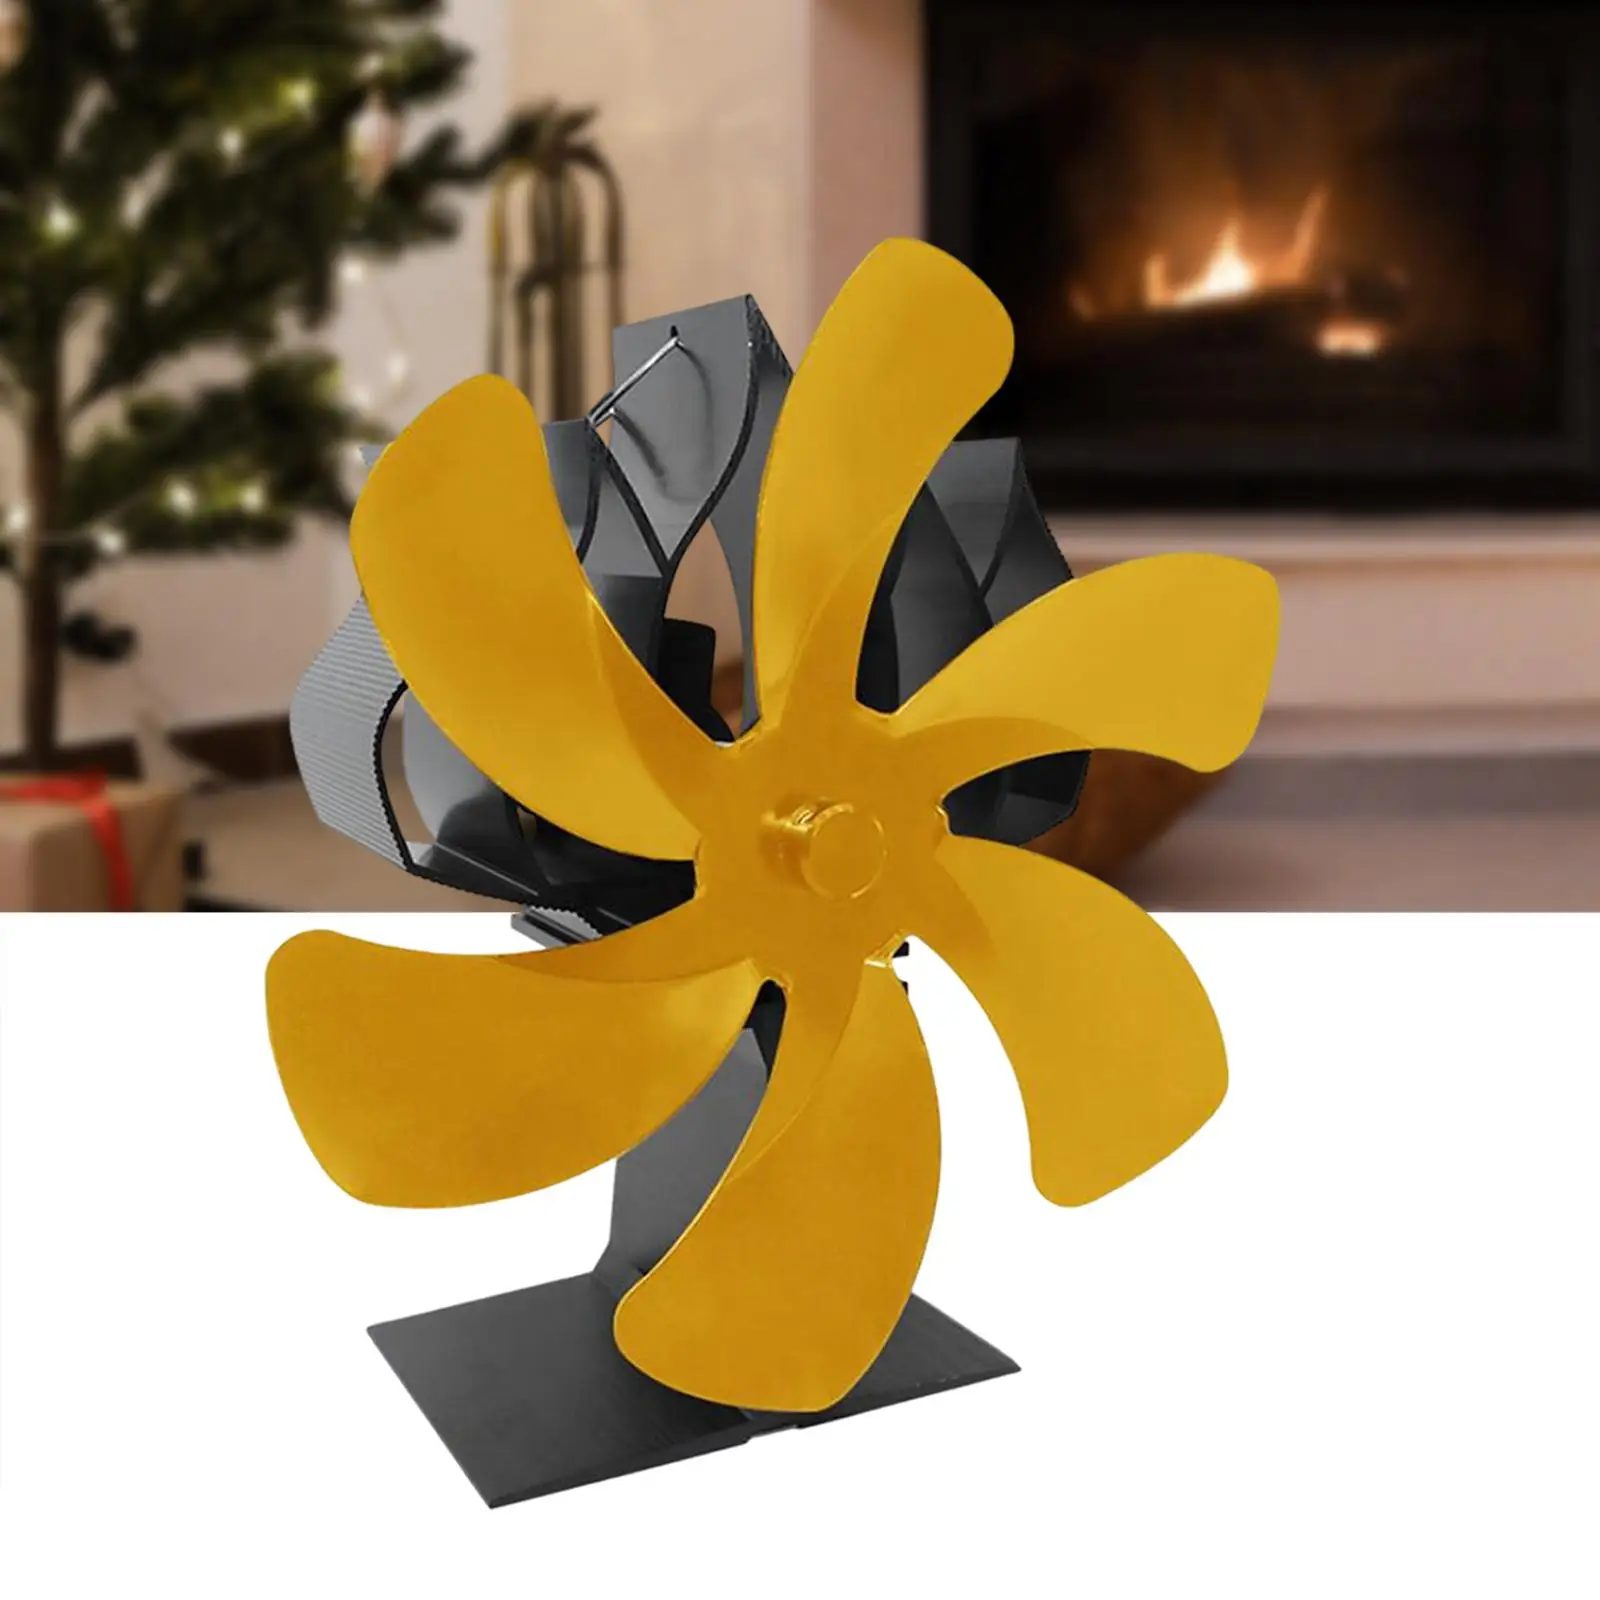 Hot Powered Fan Less Consumption Low Noise Fireplace Fan for Bedroom